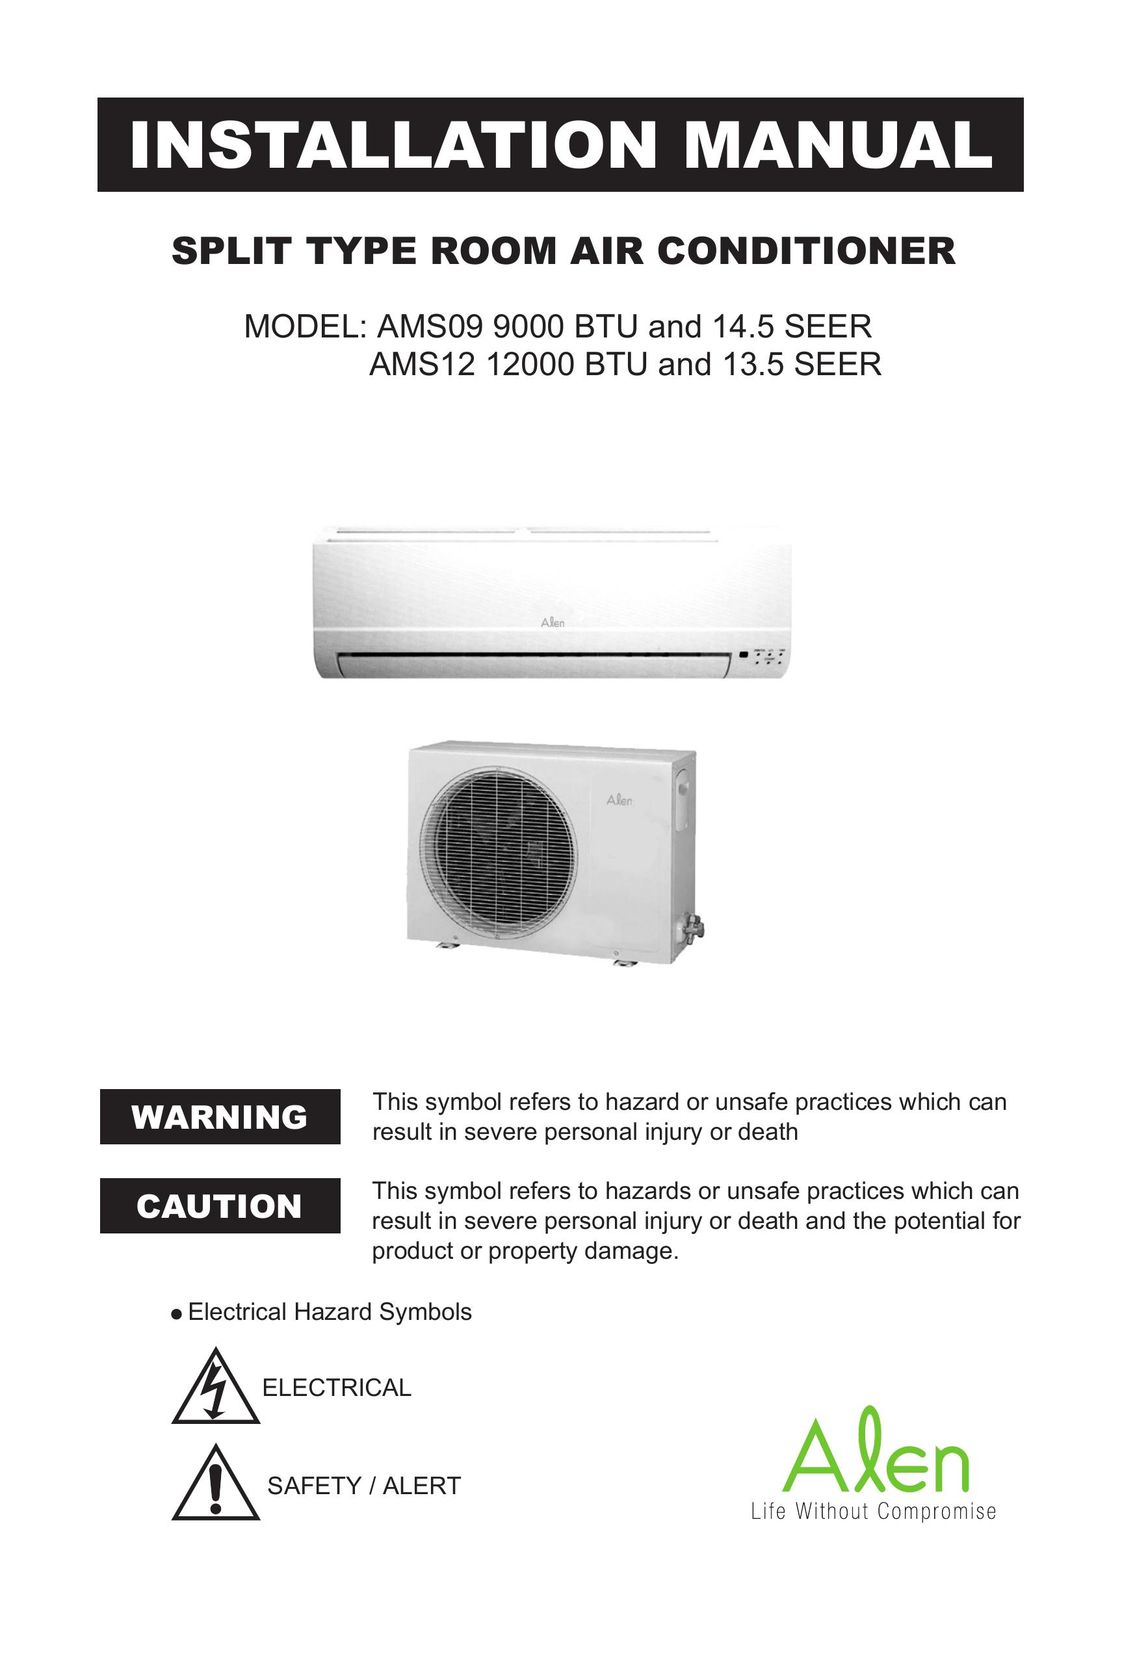 Alen AMS09 9000 BTU AND 14.5 SEER Double Oven User Manual